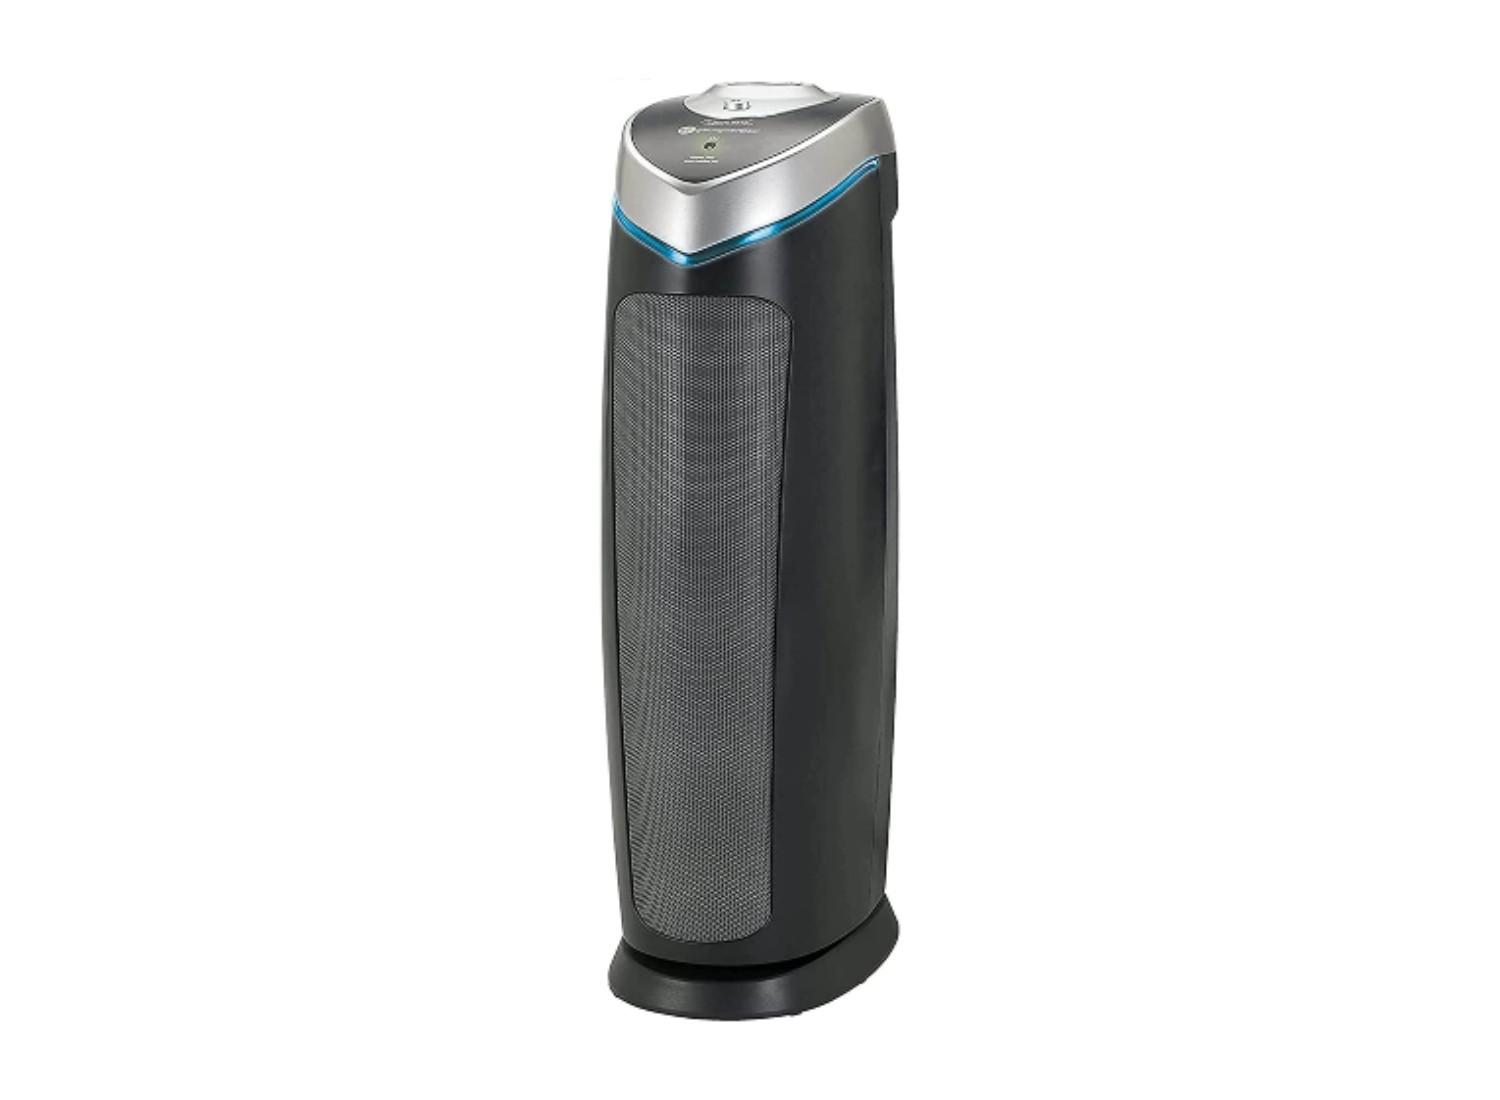 A Germ Guardian air purifier on a white background.